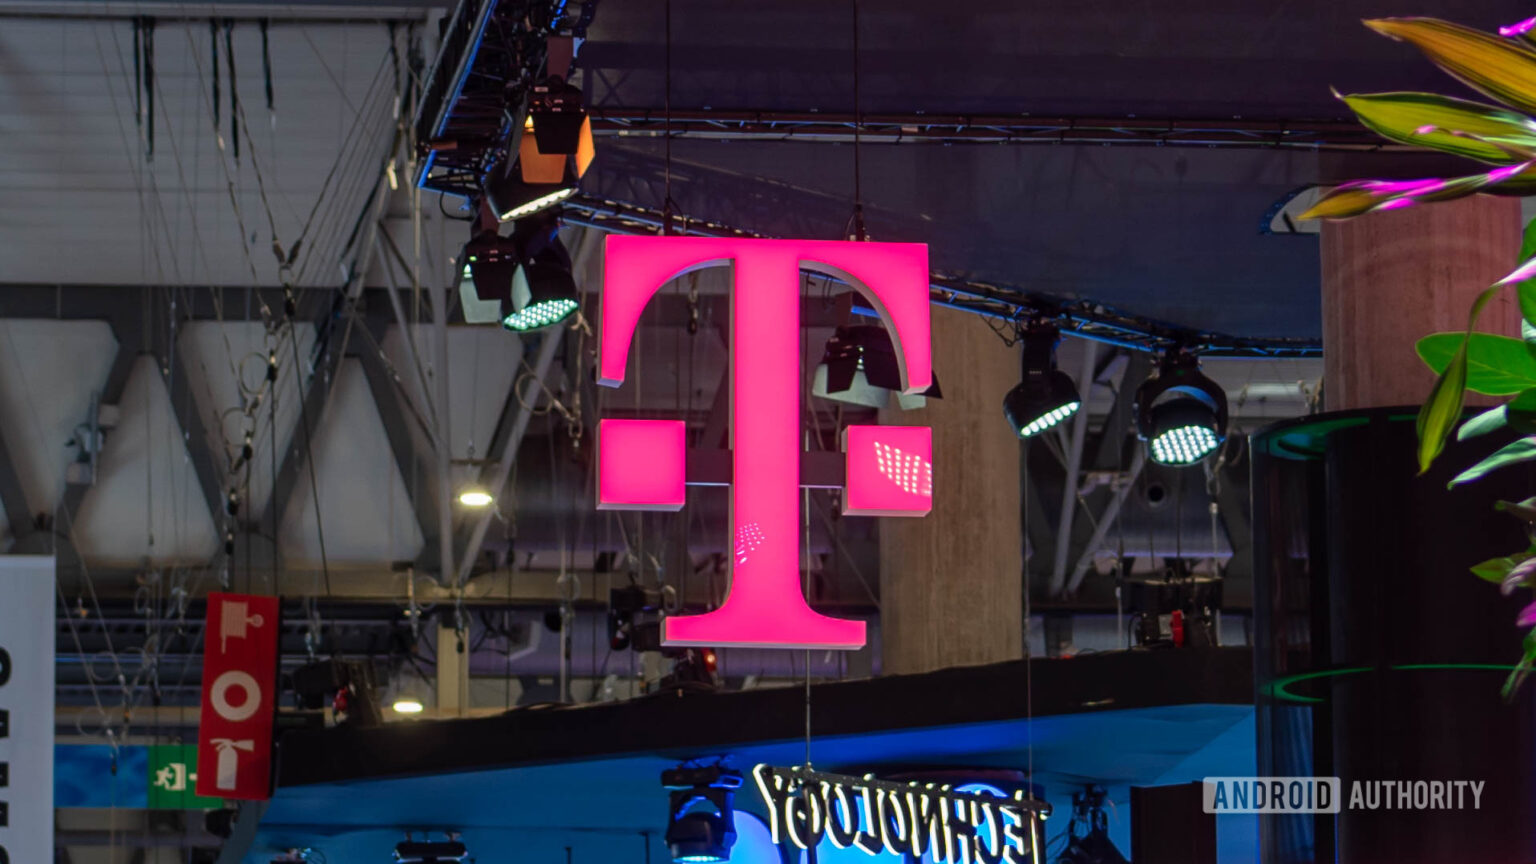 More TMobile layoffs in 2023 despite promises Android Authority